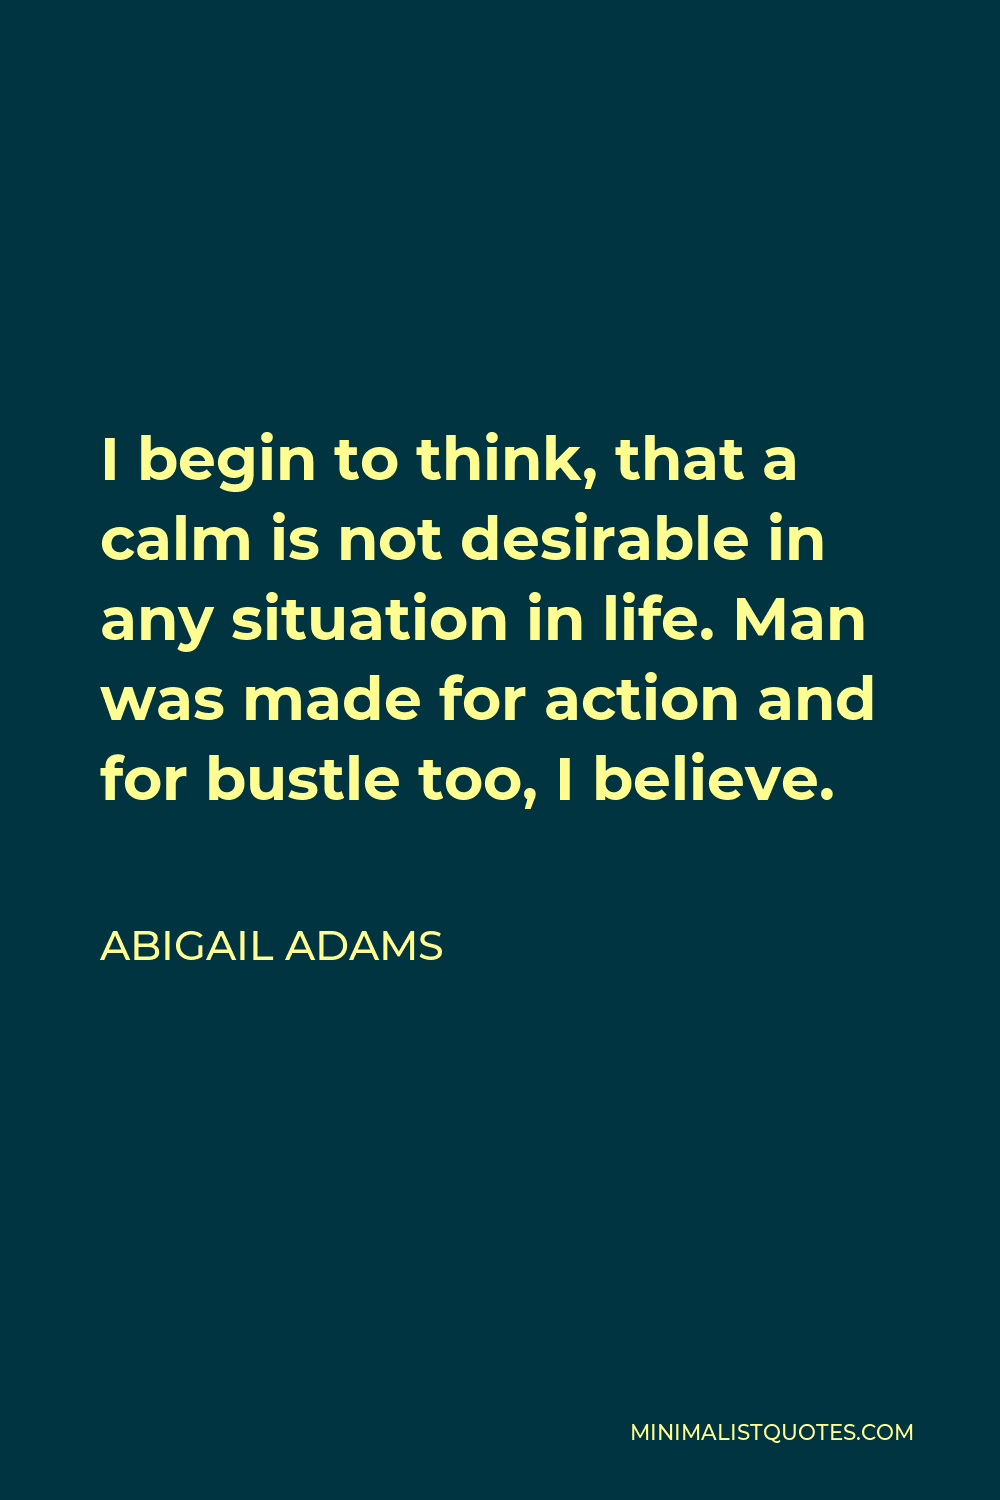 Abigail Adams Quote - I begin to think, that a calm is not desirable in any situation in life. Man was made for action and for bustle too, I believe.